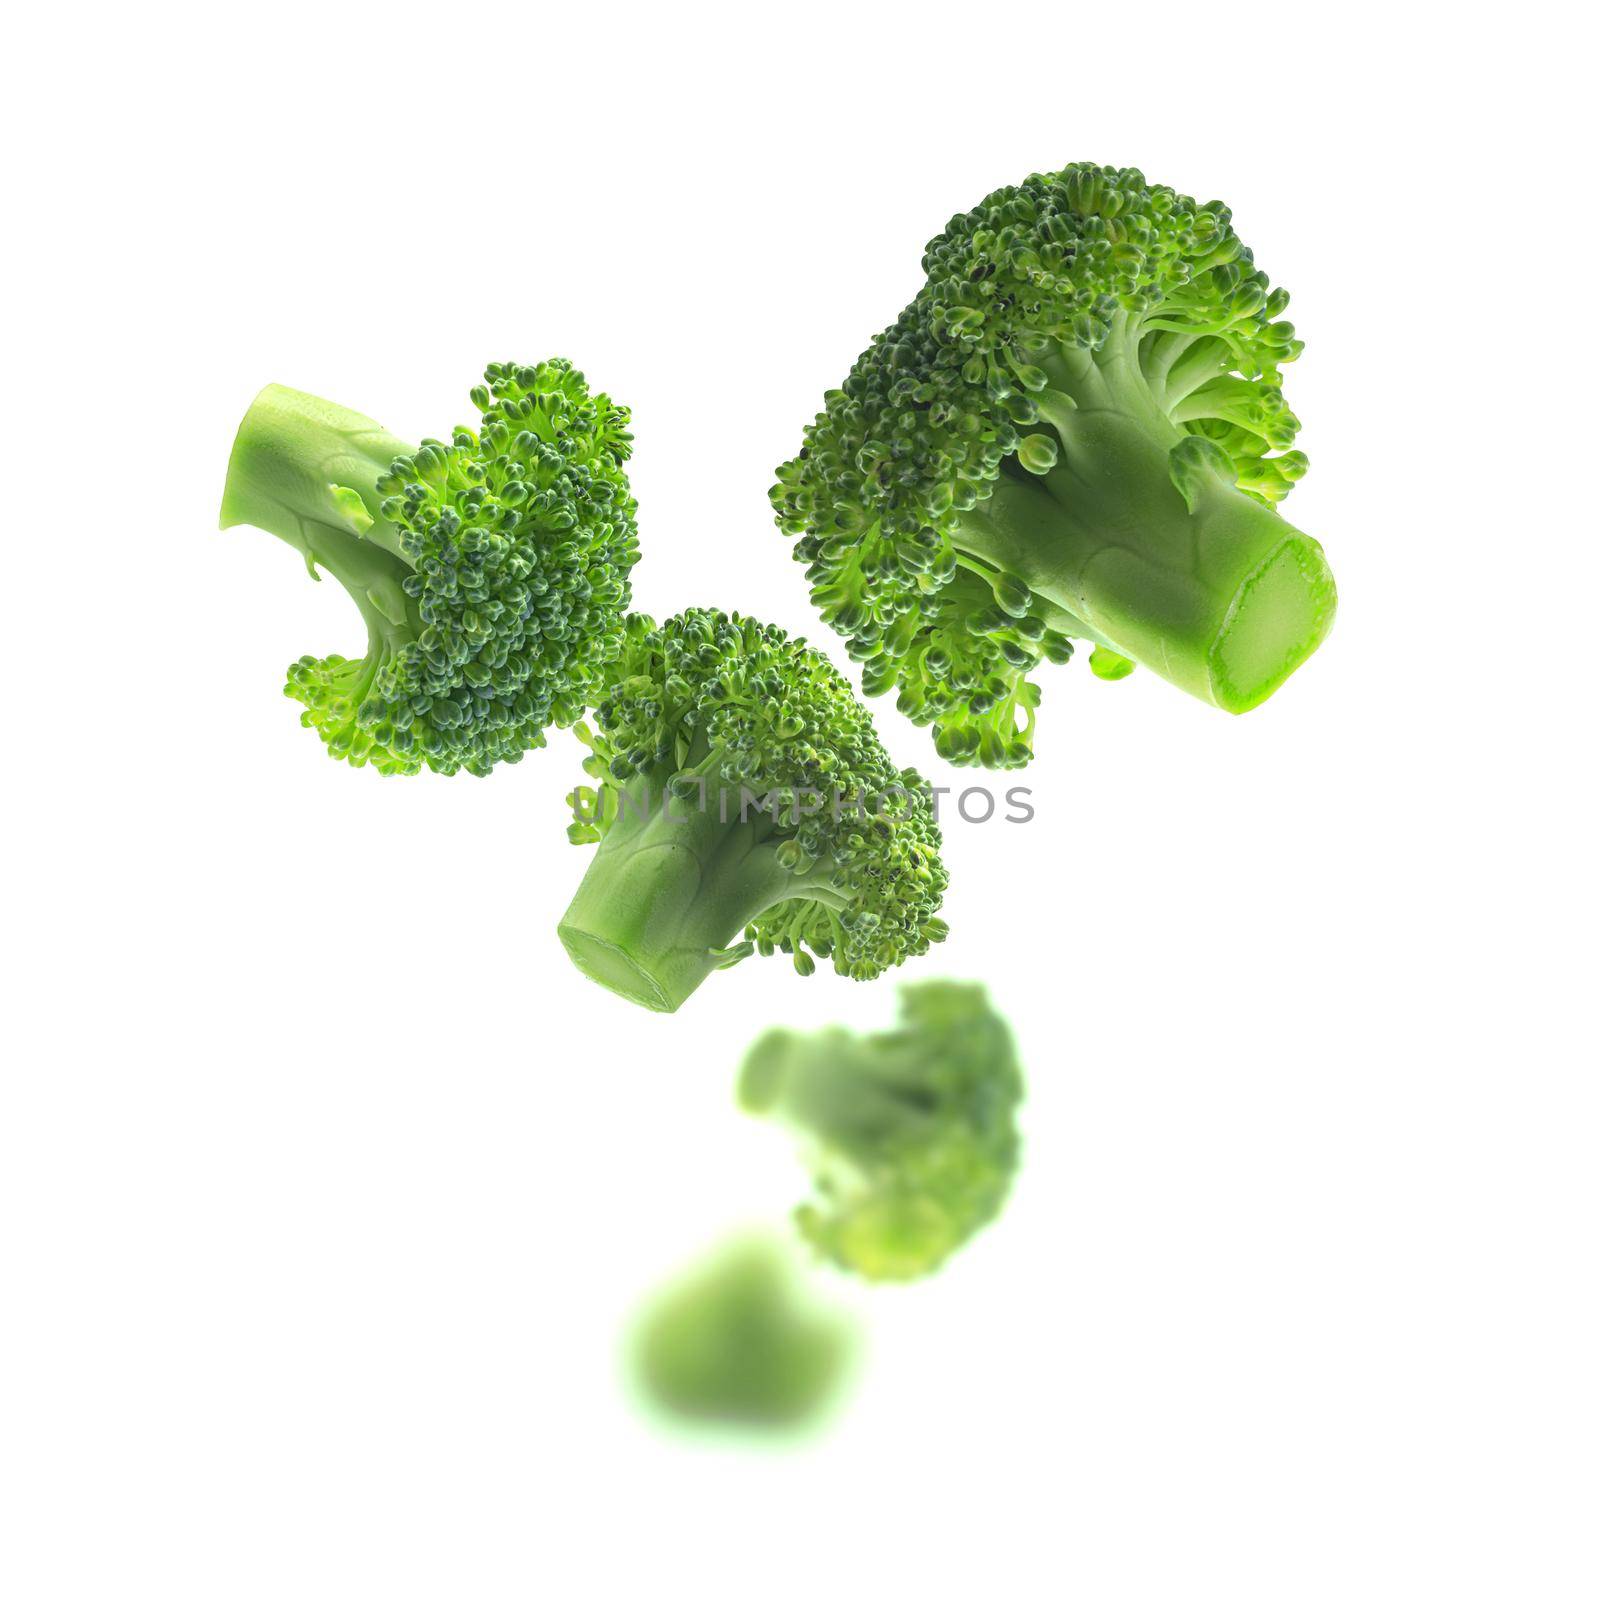 Green broccoli levitating on a white background by butenkow